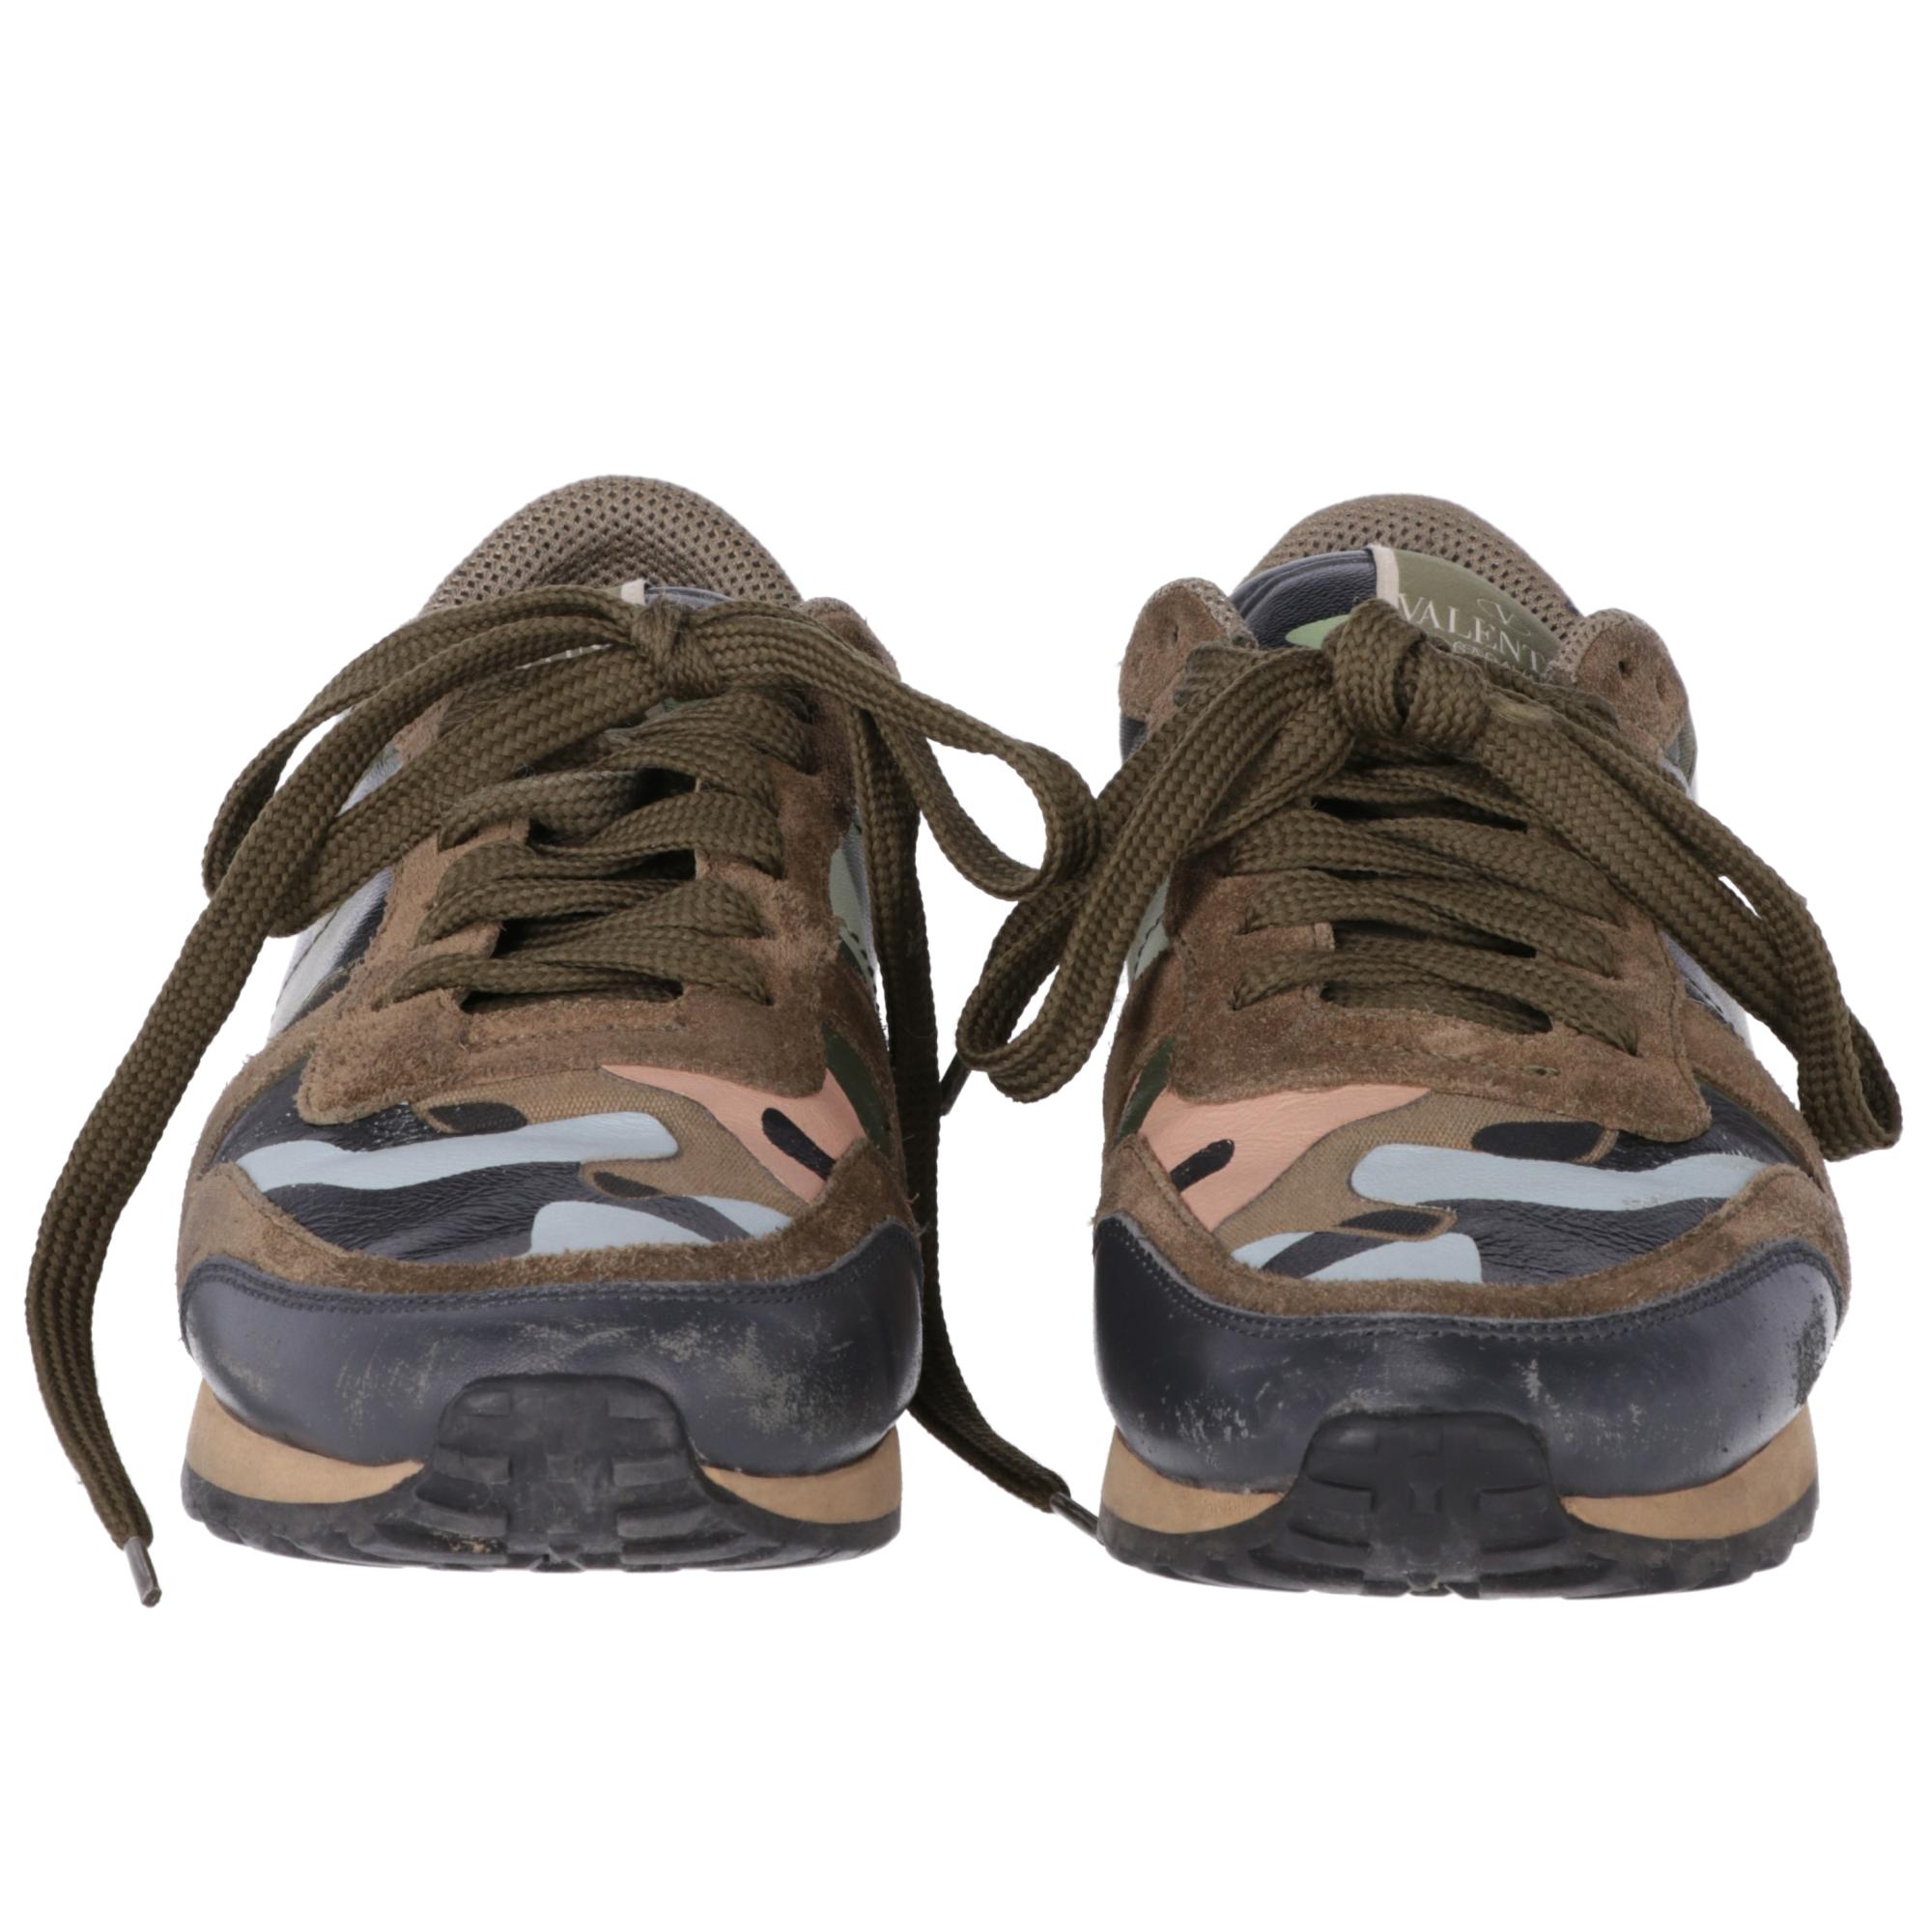 Valentino Garavani Rockrunner sneakers in leather, suede and fabric with mint green, dark green, pink and light blue camouflage pattern, rubber sole with rubber studs detail. Box and dust bag are included.

The shoes showed slight signs of wear as